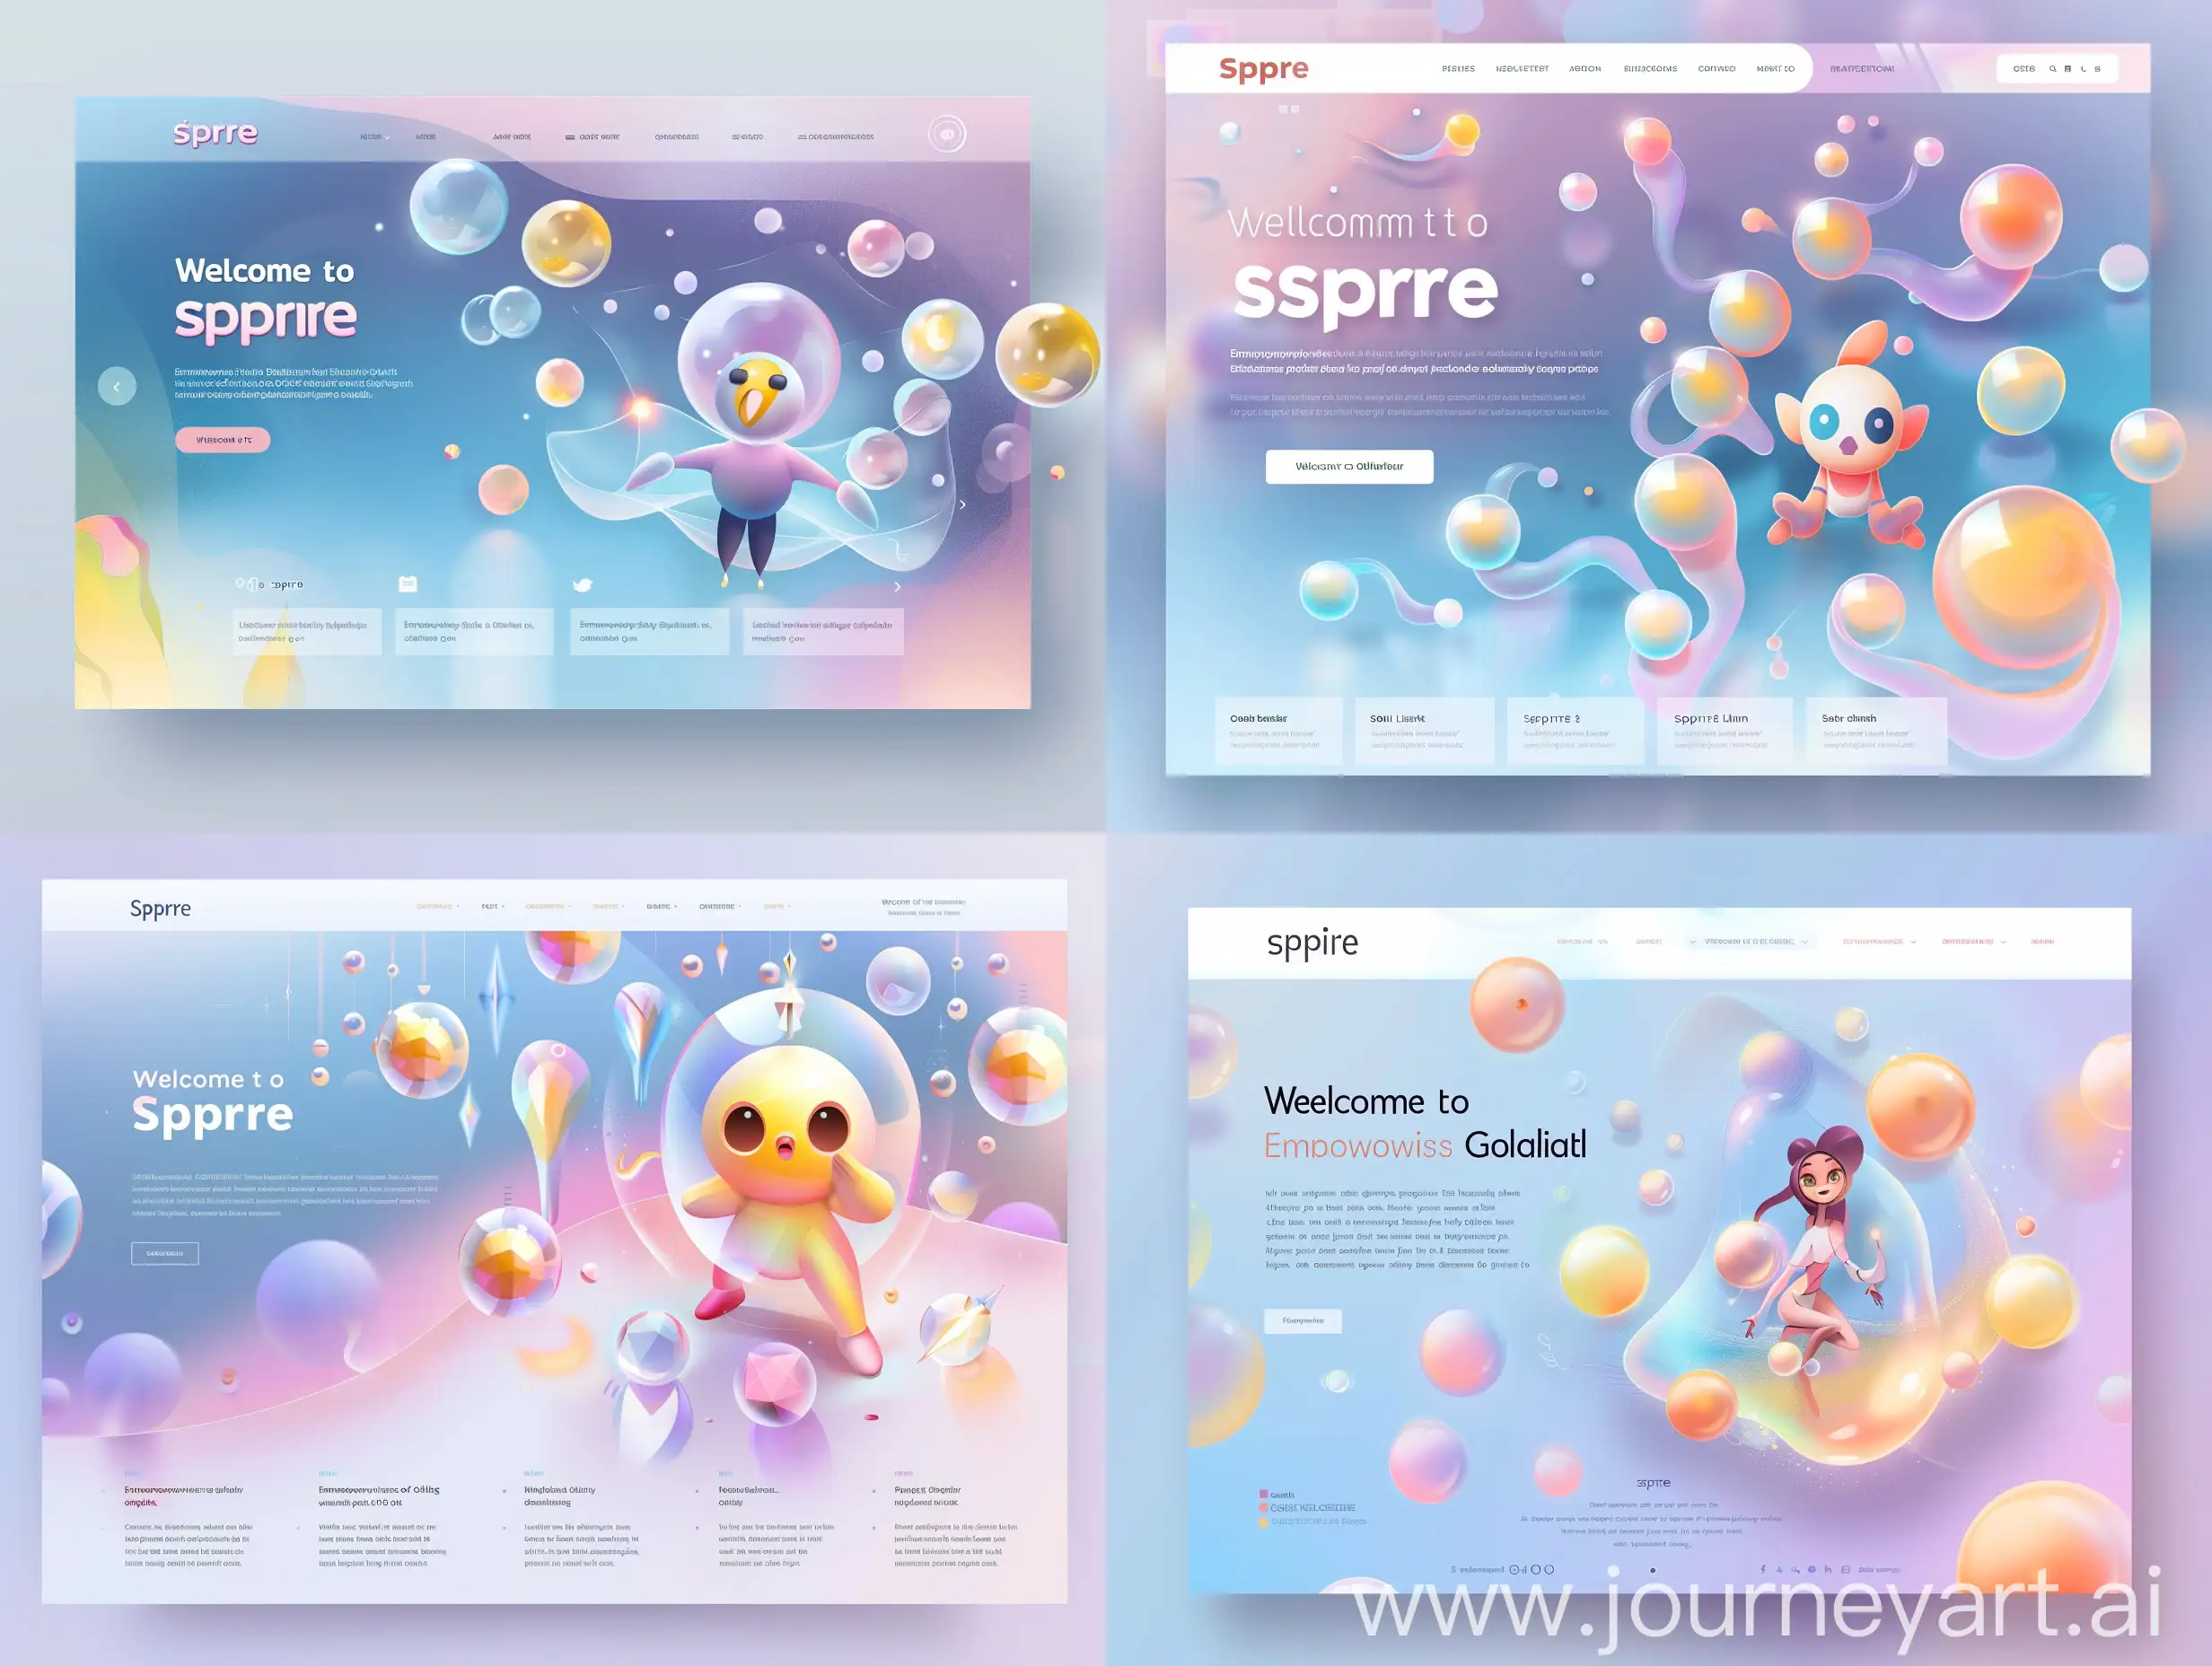 "Design the first sheet for the 'Spire' Behance project template, titled 'Welcome to Spire,' inspired by the animation Soul. The header should feature the project title 'Spire' in a bold, modern font like Helvetica Neue, with the tagline 'Empowering Industrial Design Students Globally' in a slightly smaller font like Avenir or Montserrat. Use a background gradient transitioning from soft blue to purple, with accents of pink and yellow to add warmth and vibrancy.
Include an introduction paragraph that provides a brief overview of Spire’s mission and vision, written in a clean, readable font like Arial or Open Sans. The main visual should prominently feature the character Lumino, centered and surrounded by floating orbs representing ideas and creativity. Incorporate glassmorphism effects and playful animations to enhance the visual appeal. Ensure the background includes subtle, interactive elements like small animations and hover effects to engage users.
The footer should contain links to social media, contact information, and additional resources. Maintain a consistent style throughout, ensuring the design is responsive and user-friendly, with a focus on usability and accessibility."